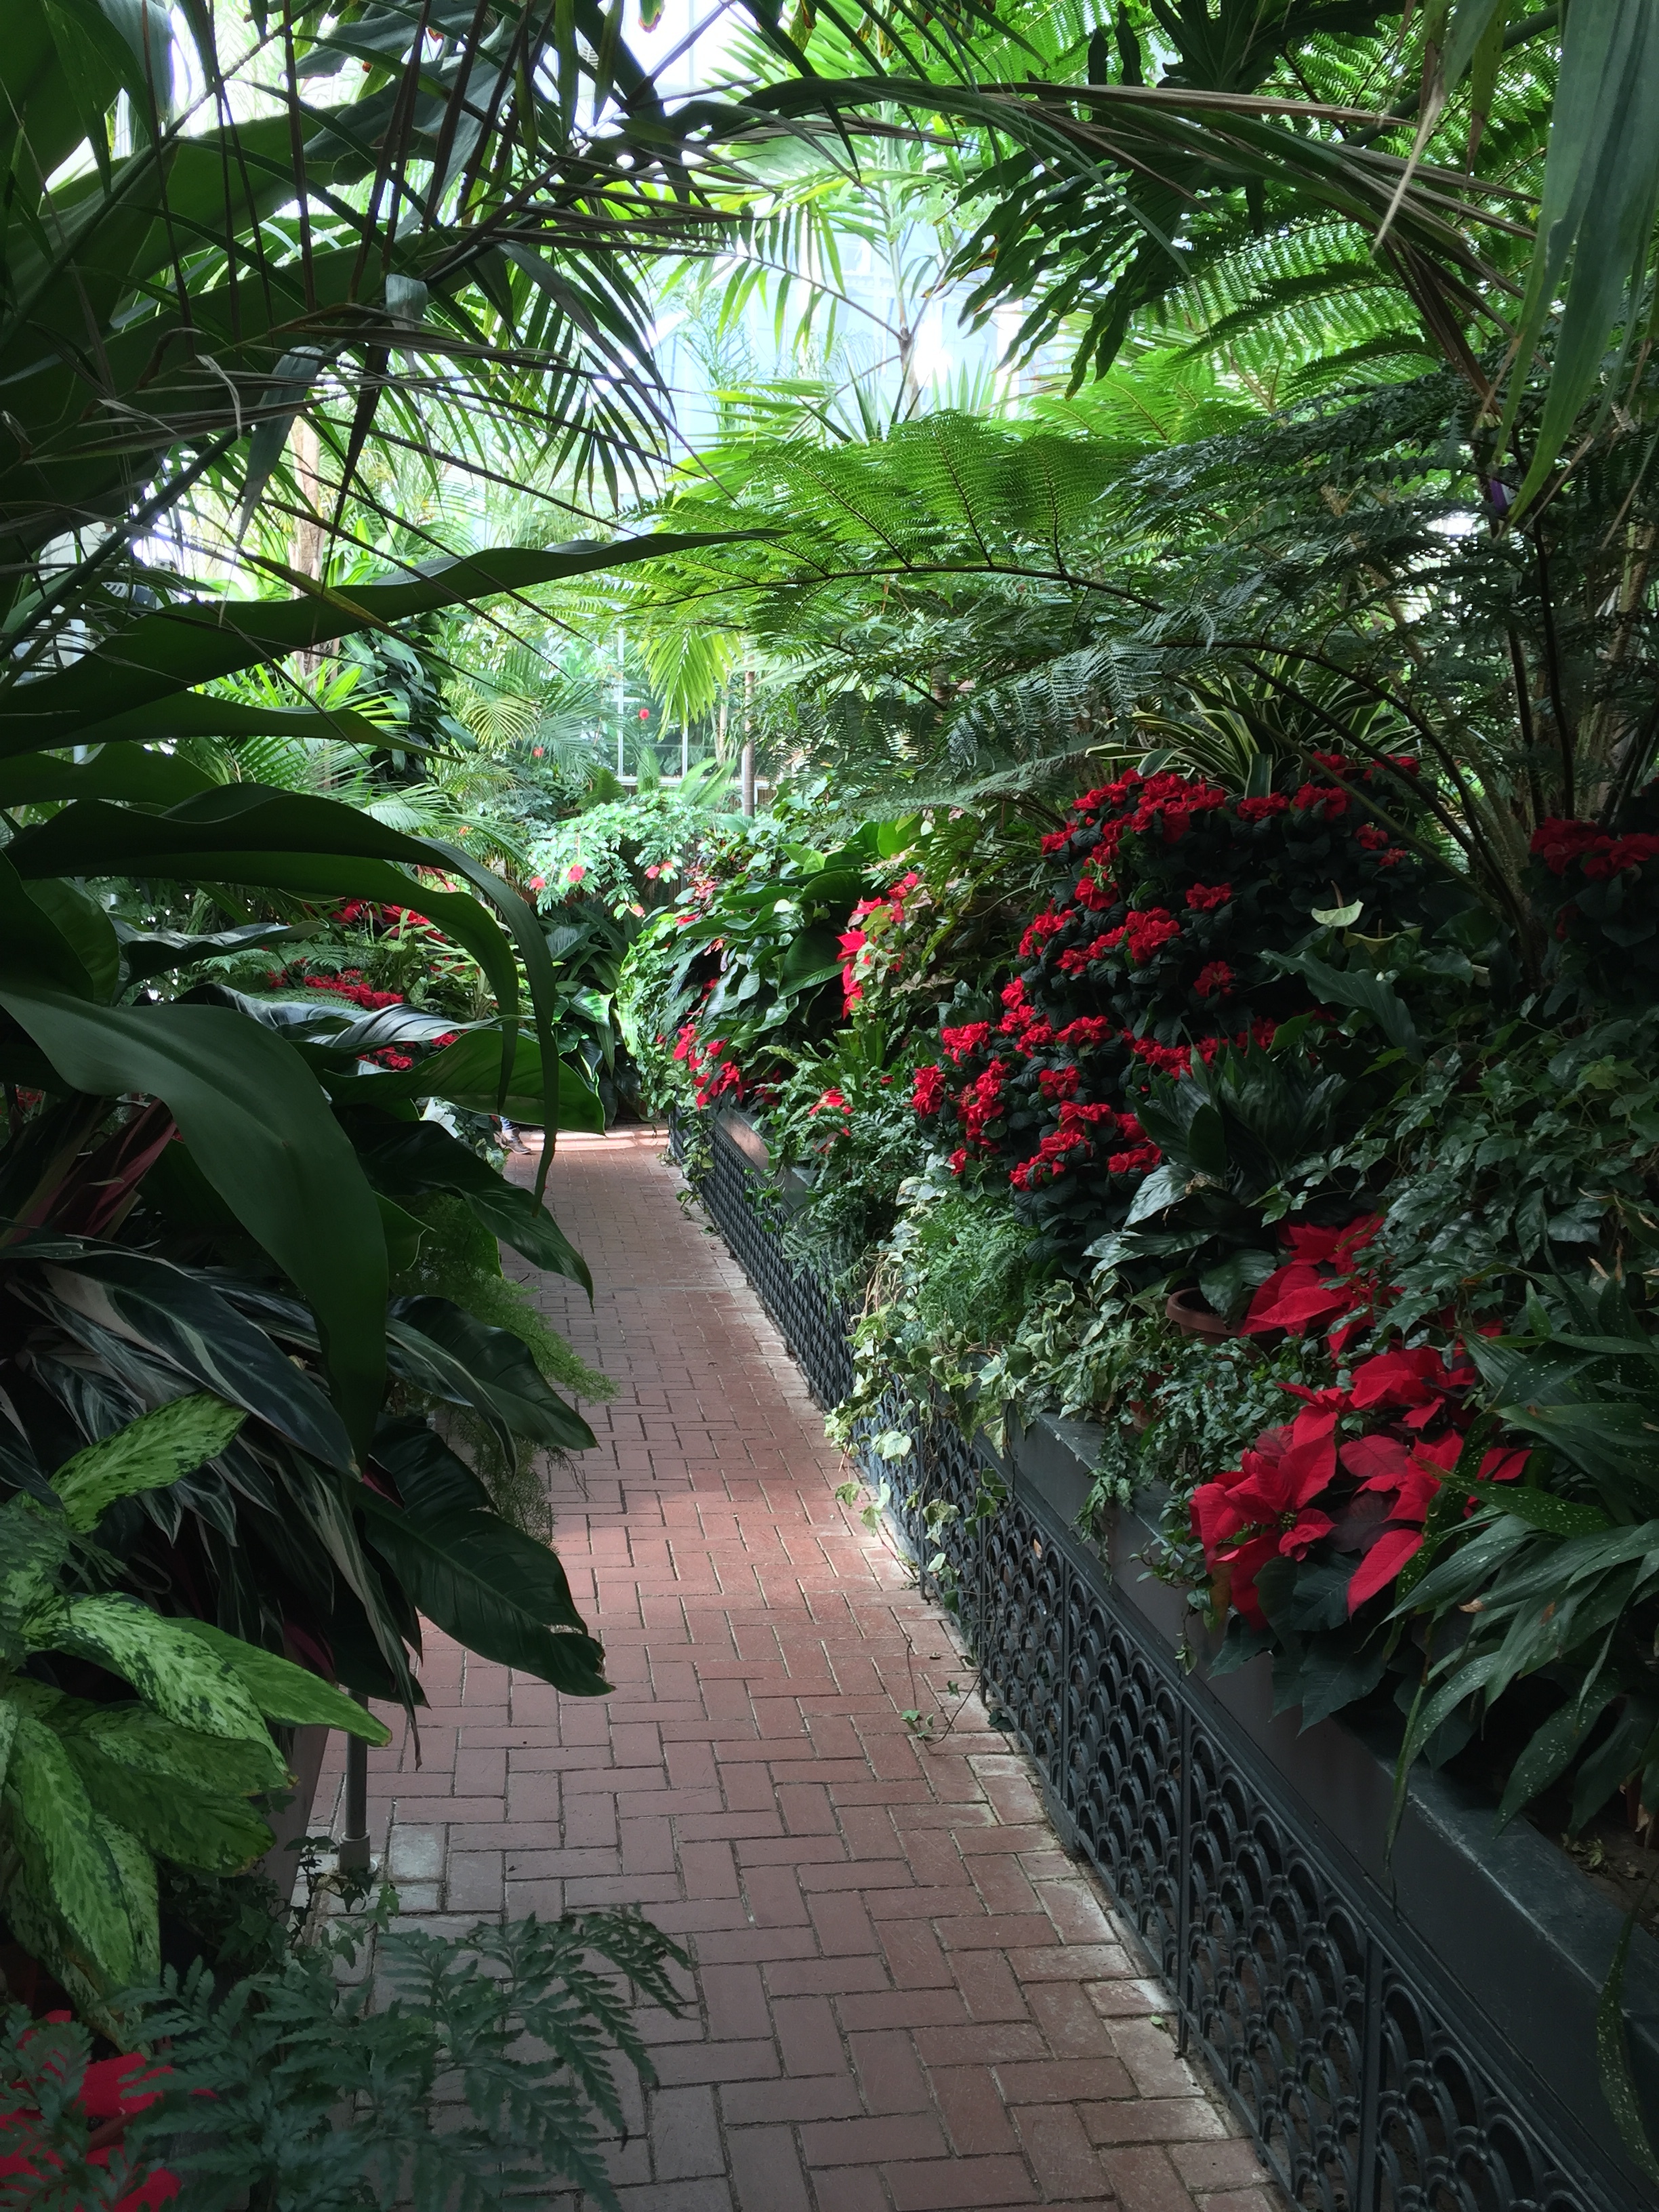 Inside the greenhouse in the adjacent botanical gardens.